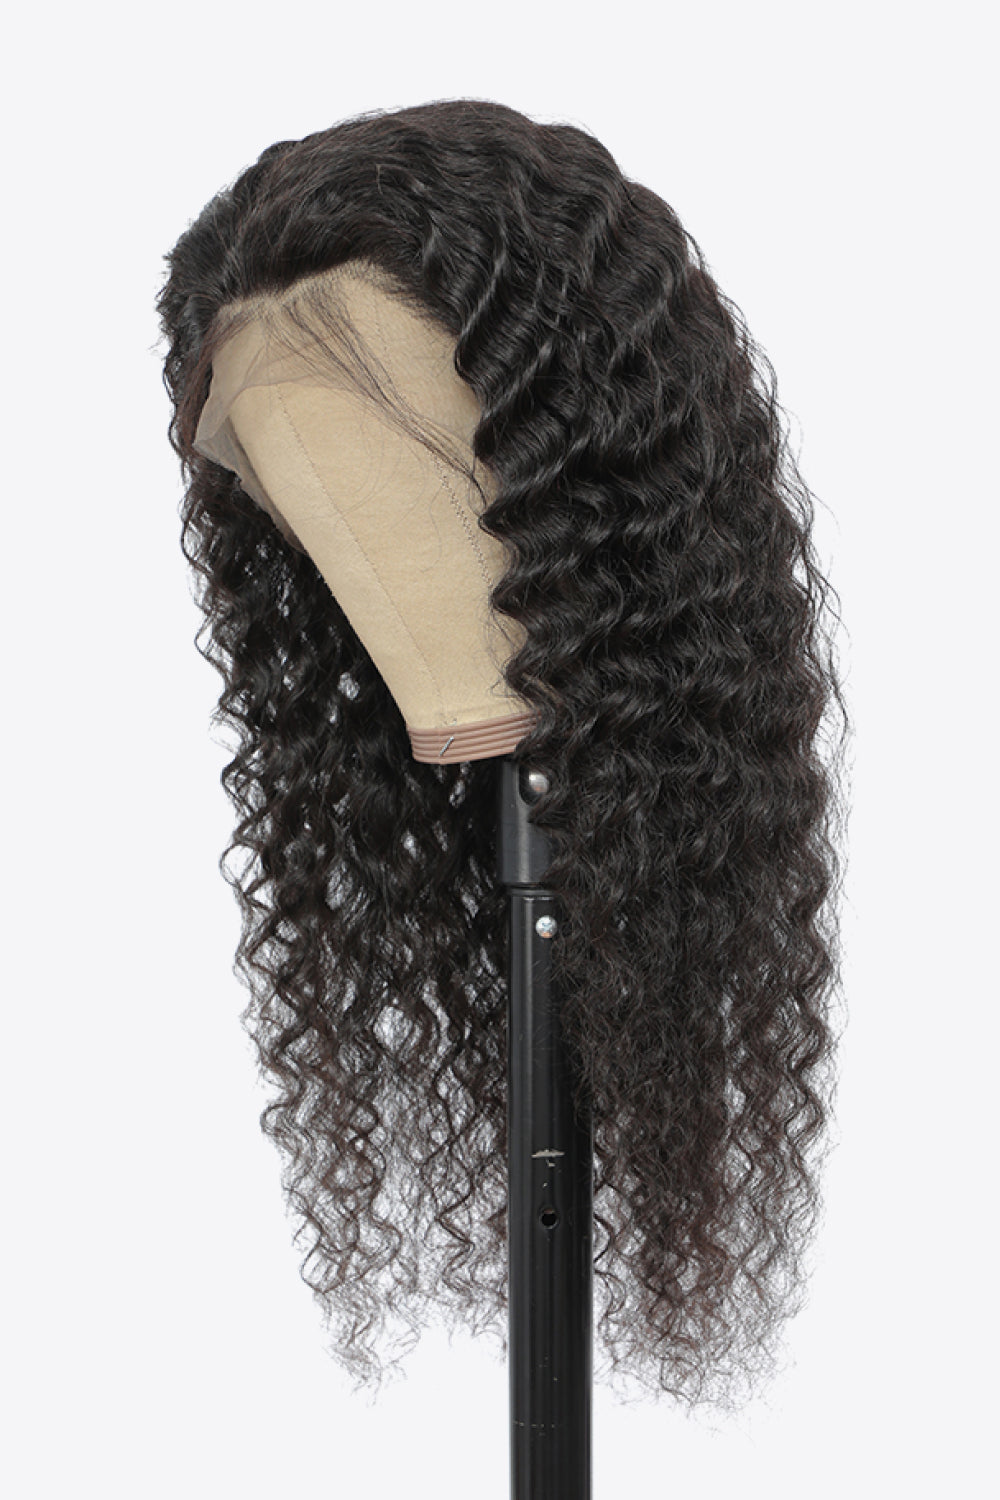 20” 13*4“ Lace Front Curly Wigs Human Virgin Hair in Natural Color 150% Density